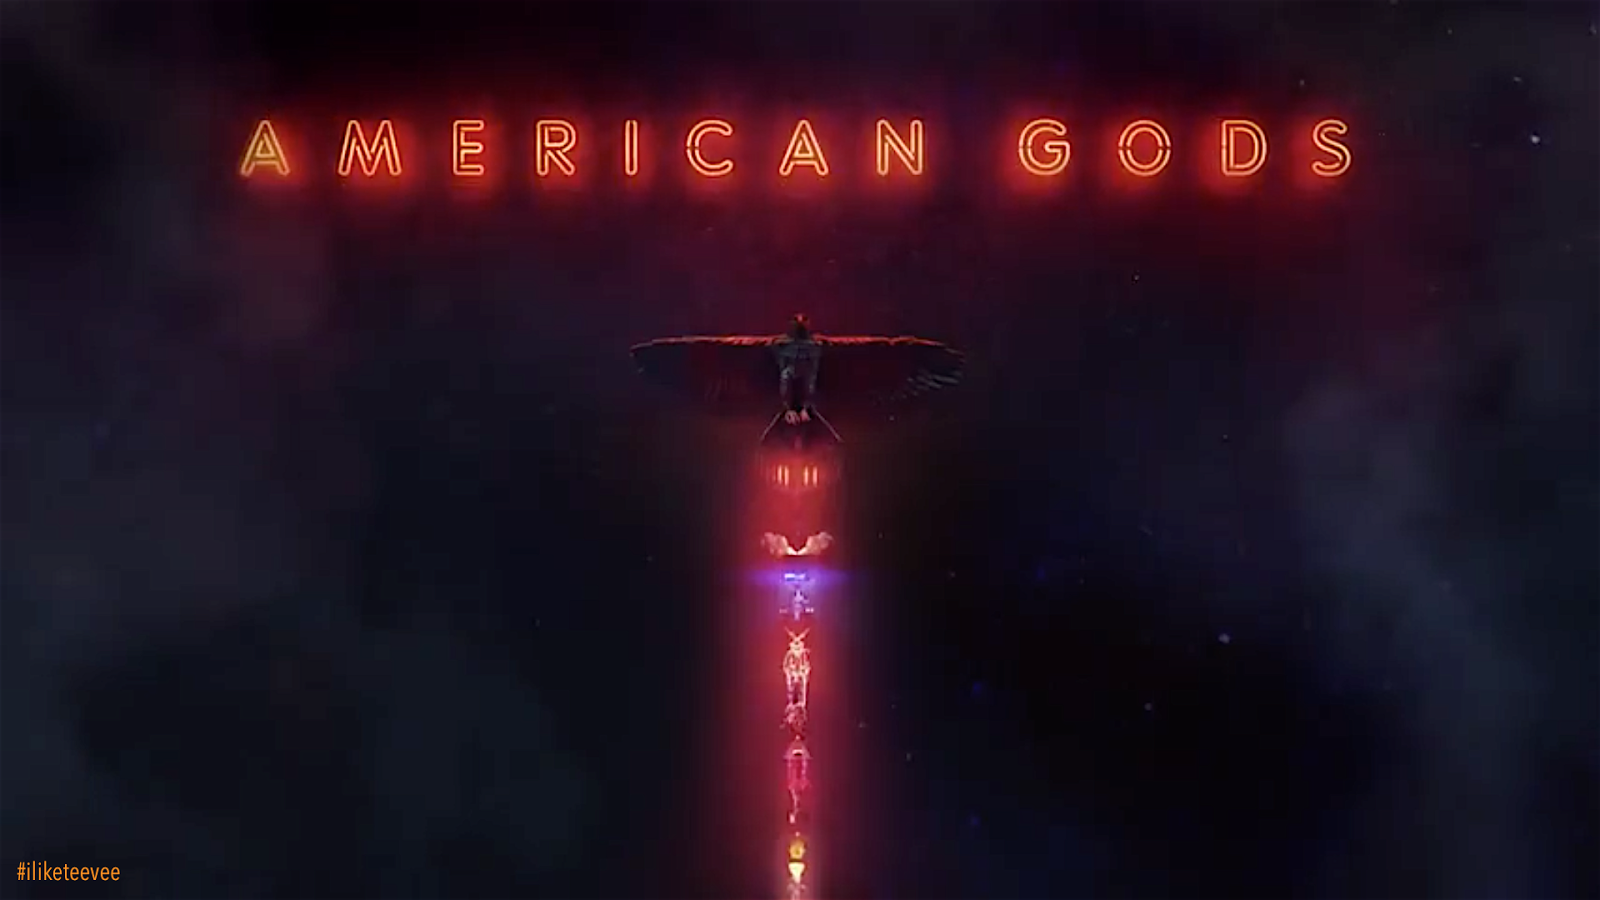 American Gods Wallpapers and Background Images   stmednet